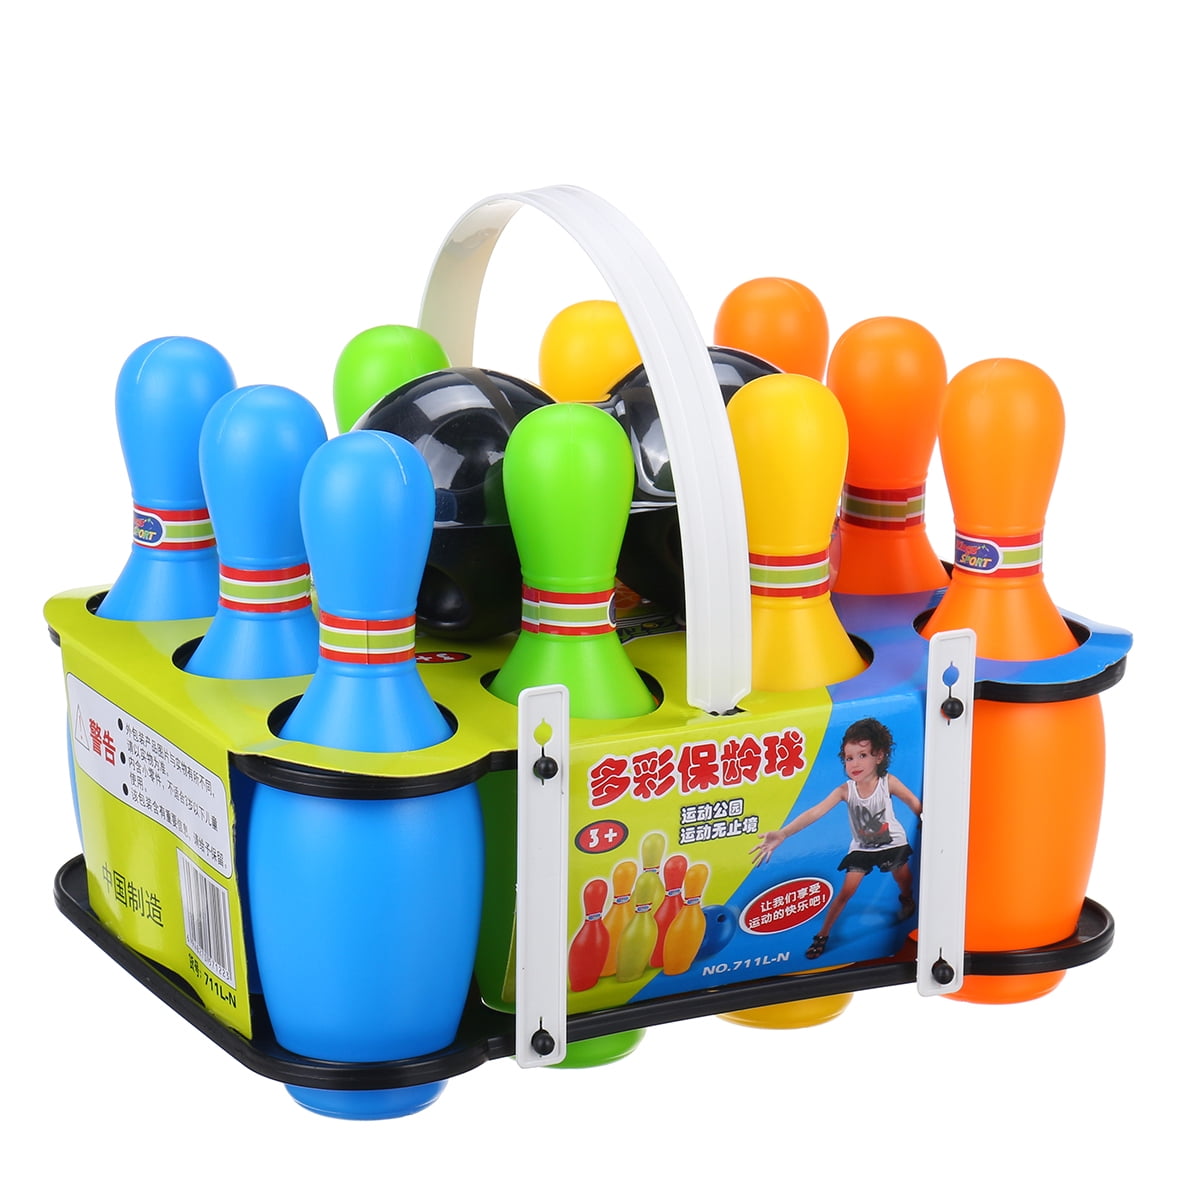 Kids Bowling Toy Set Children Toddler Indoor Outdoor Bowling Play Sport Game Fun